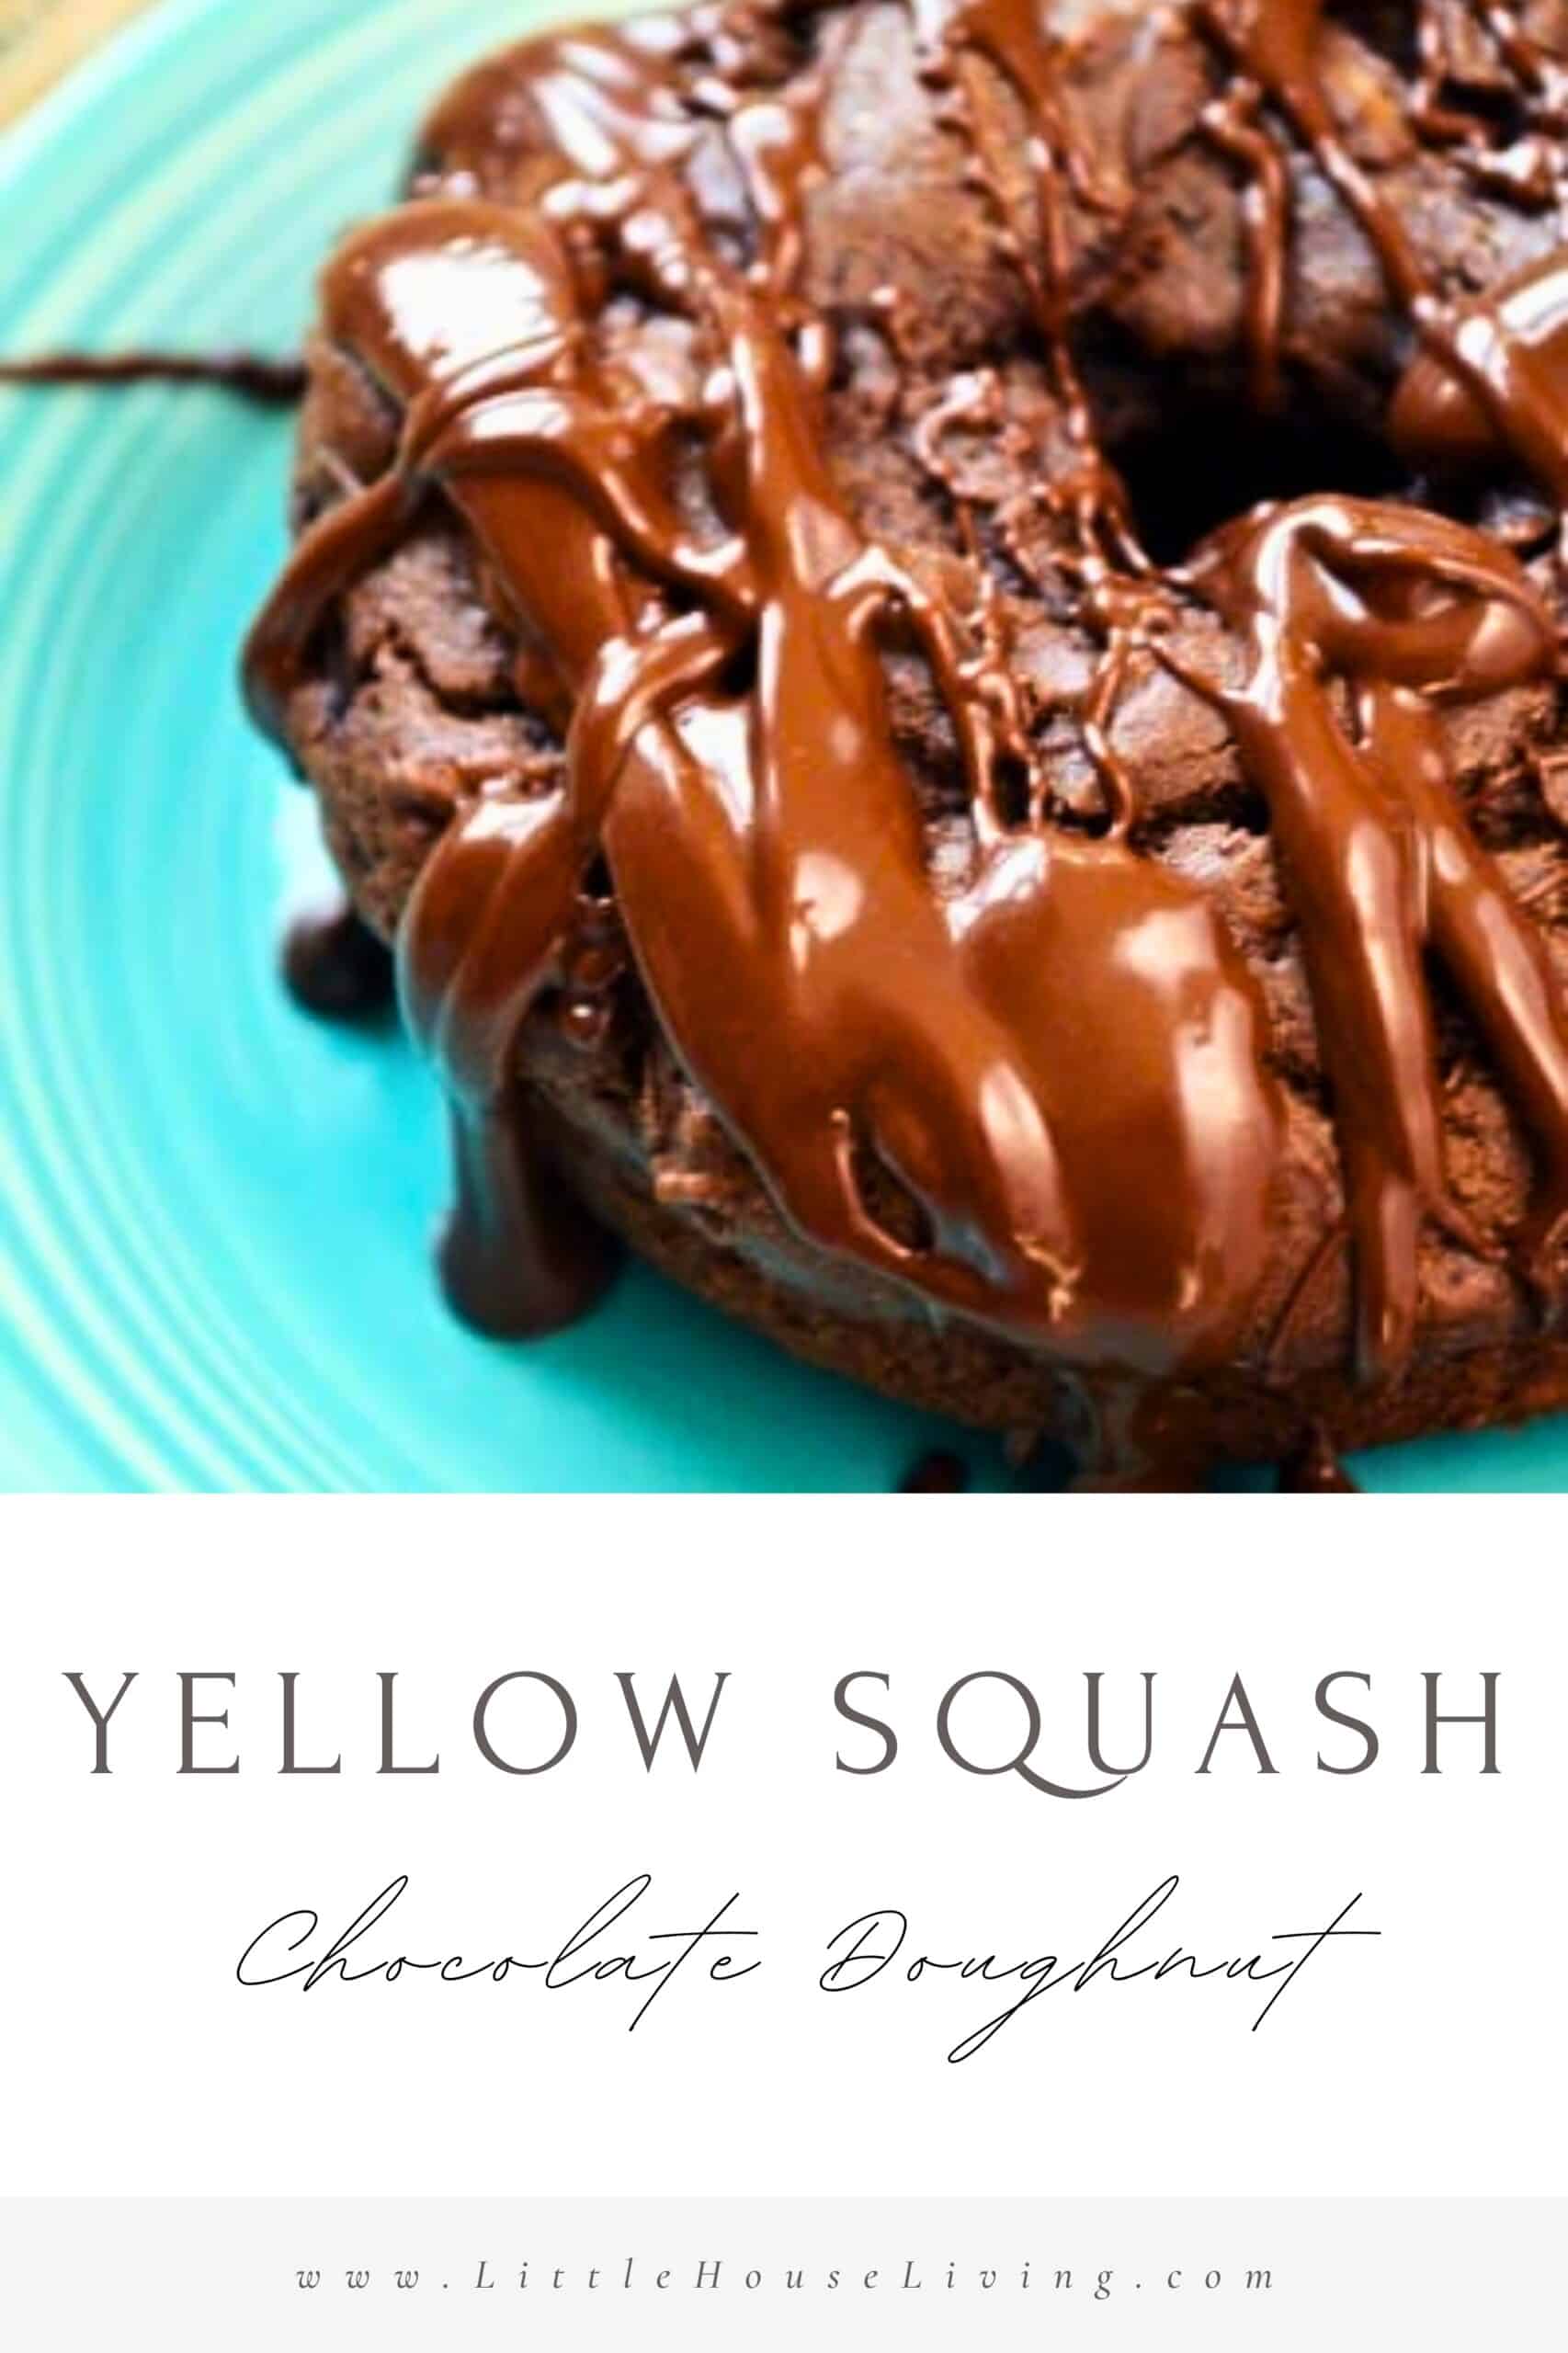 Looking for a deliciously sweet way to use up all of the yellow squash in your garden right now? Believe it or not, this beautiful Yellow Squash Chocolate Doughnut Recipe is filled with plenty of the veggie!